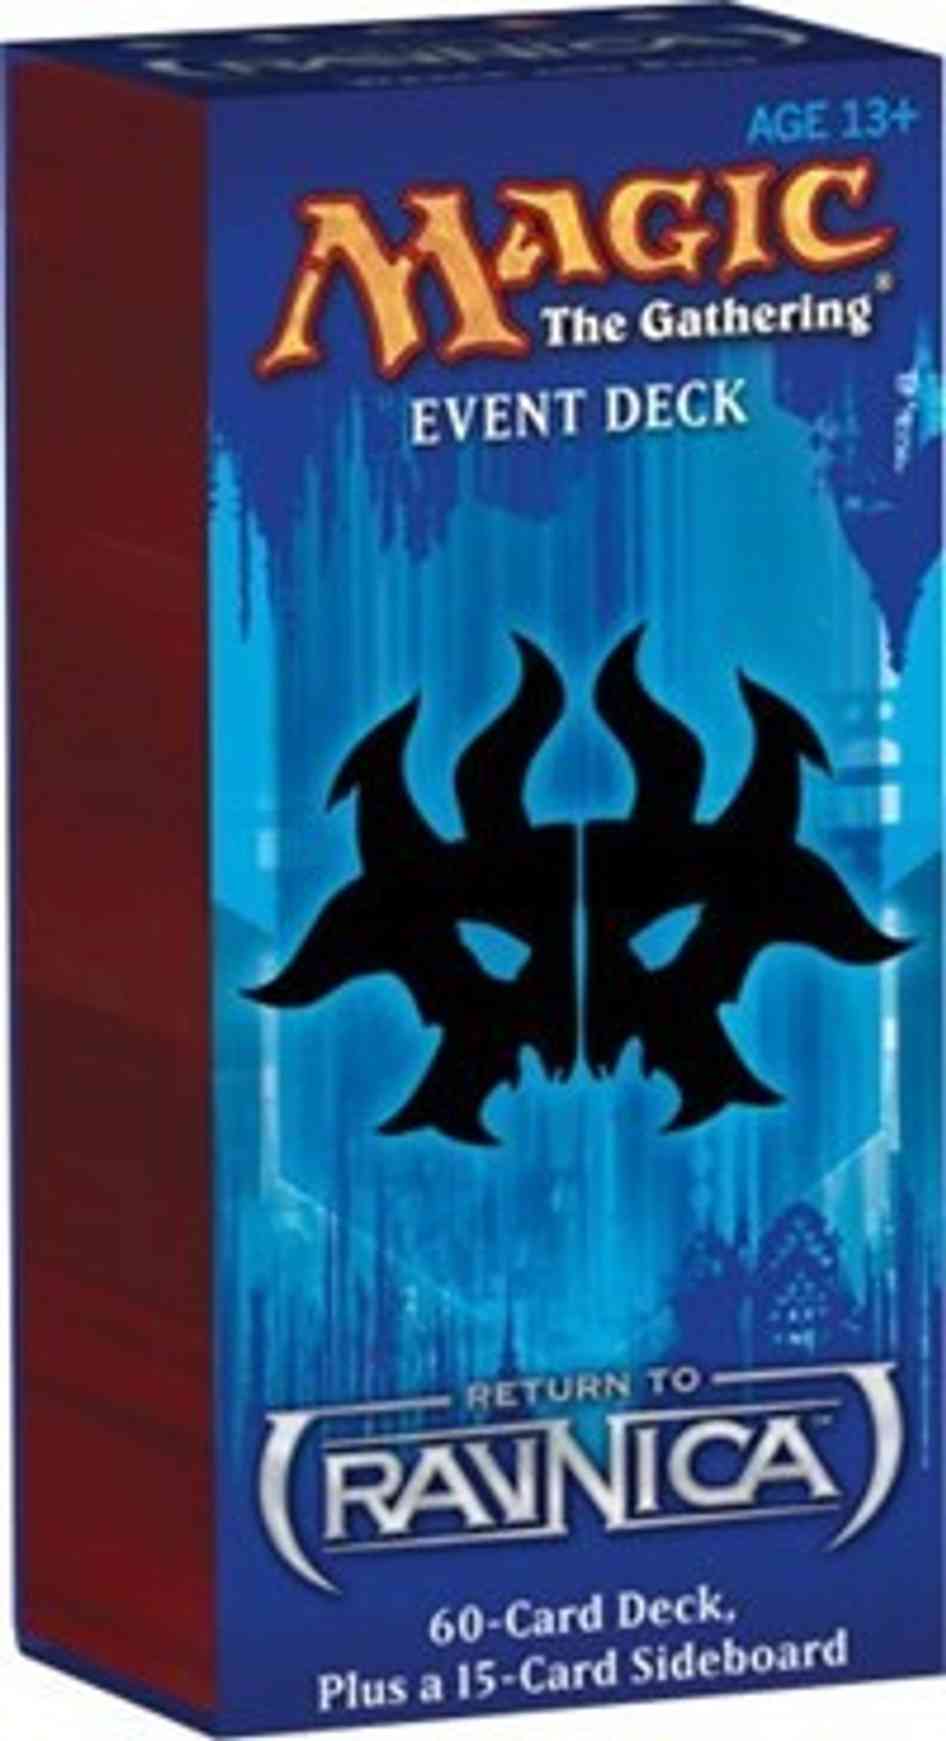 Return to Ravnica Event Deck - Wrack and Rage magic card front